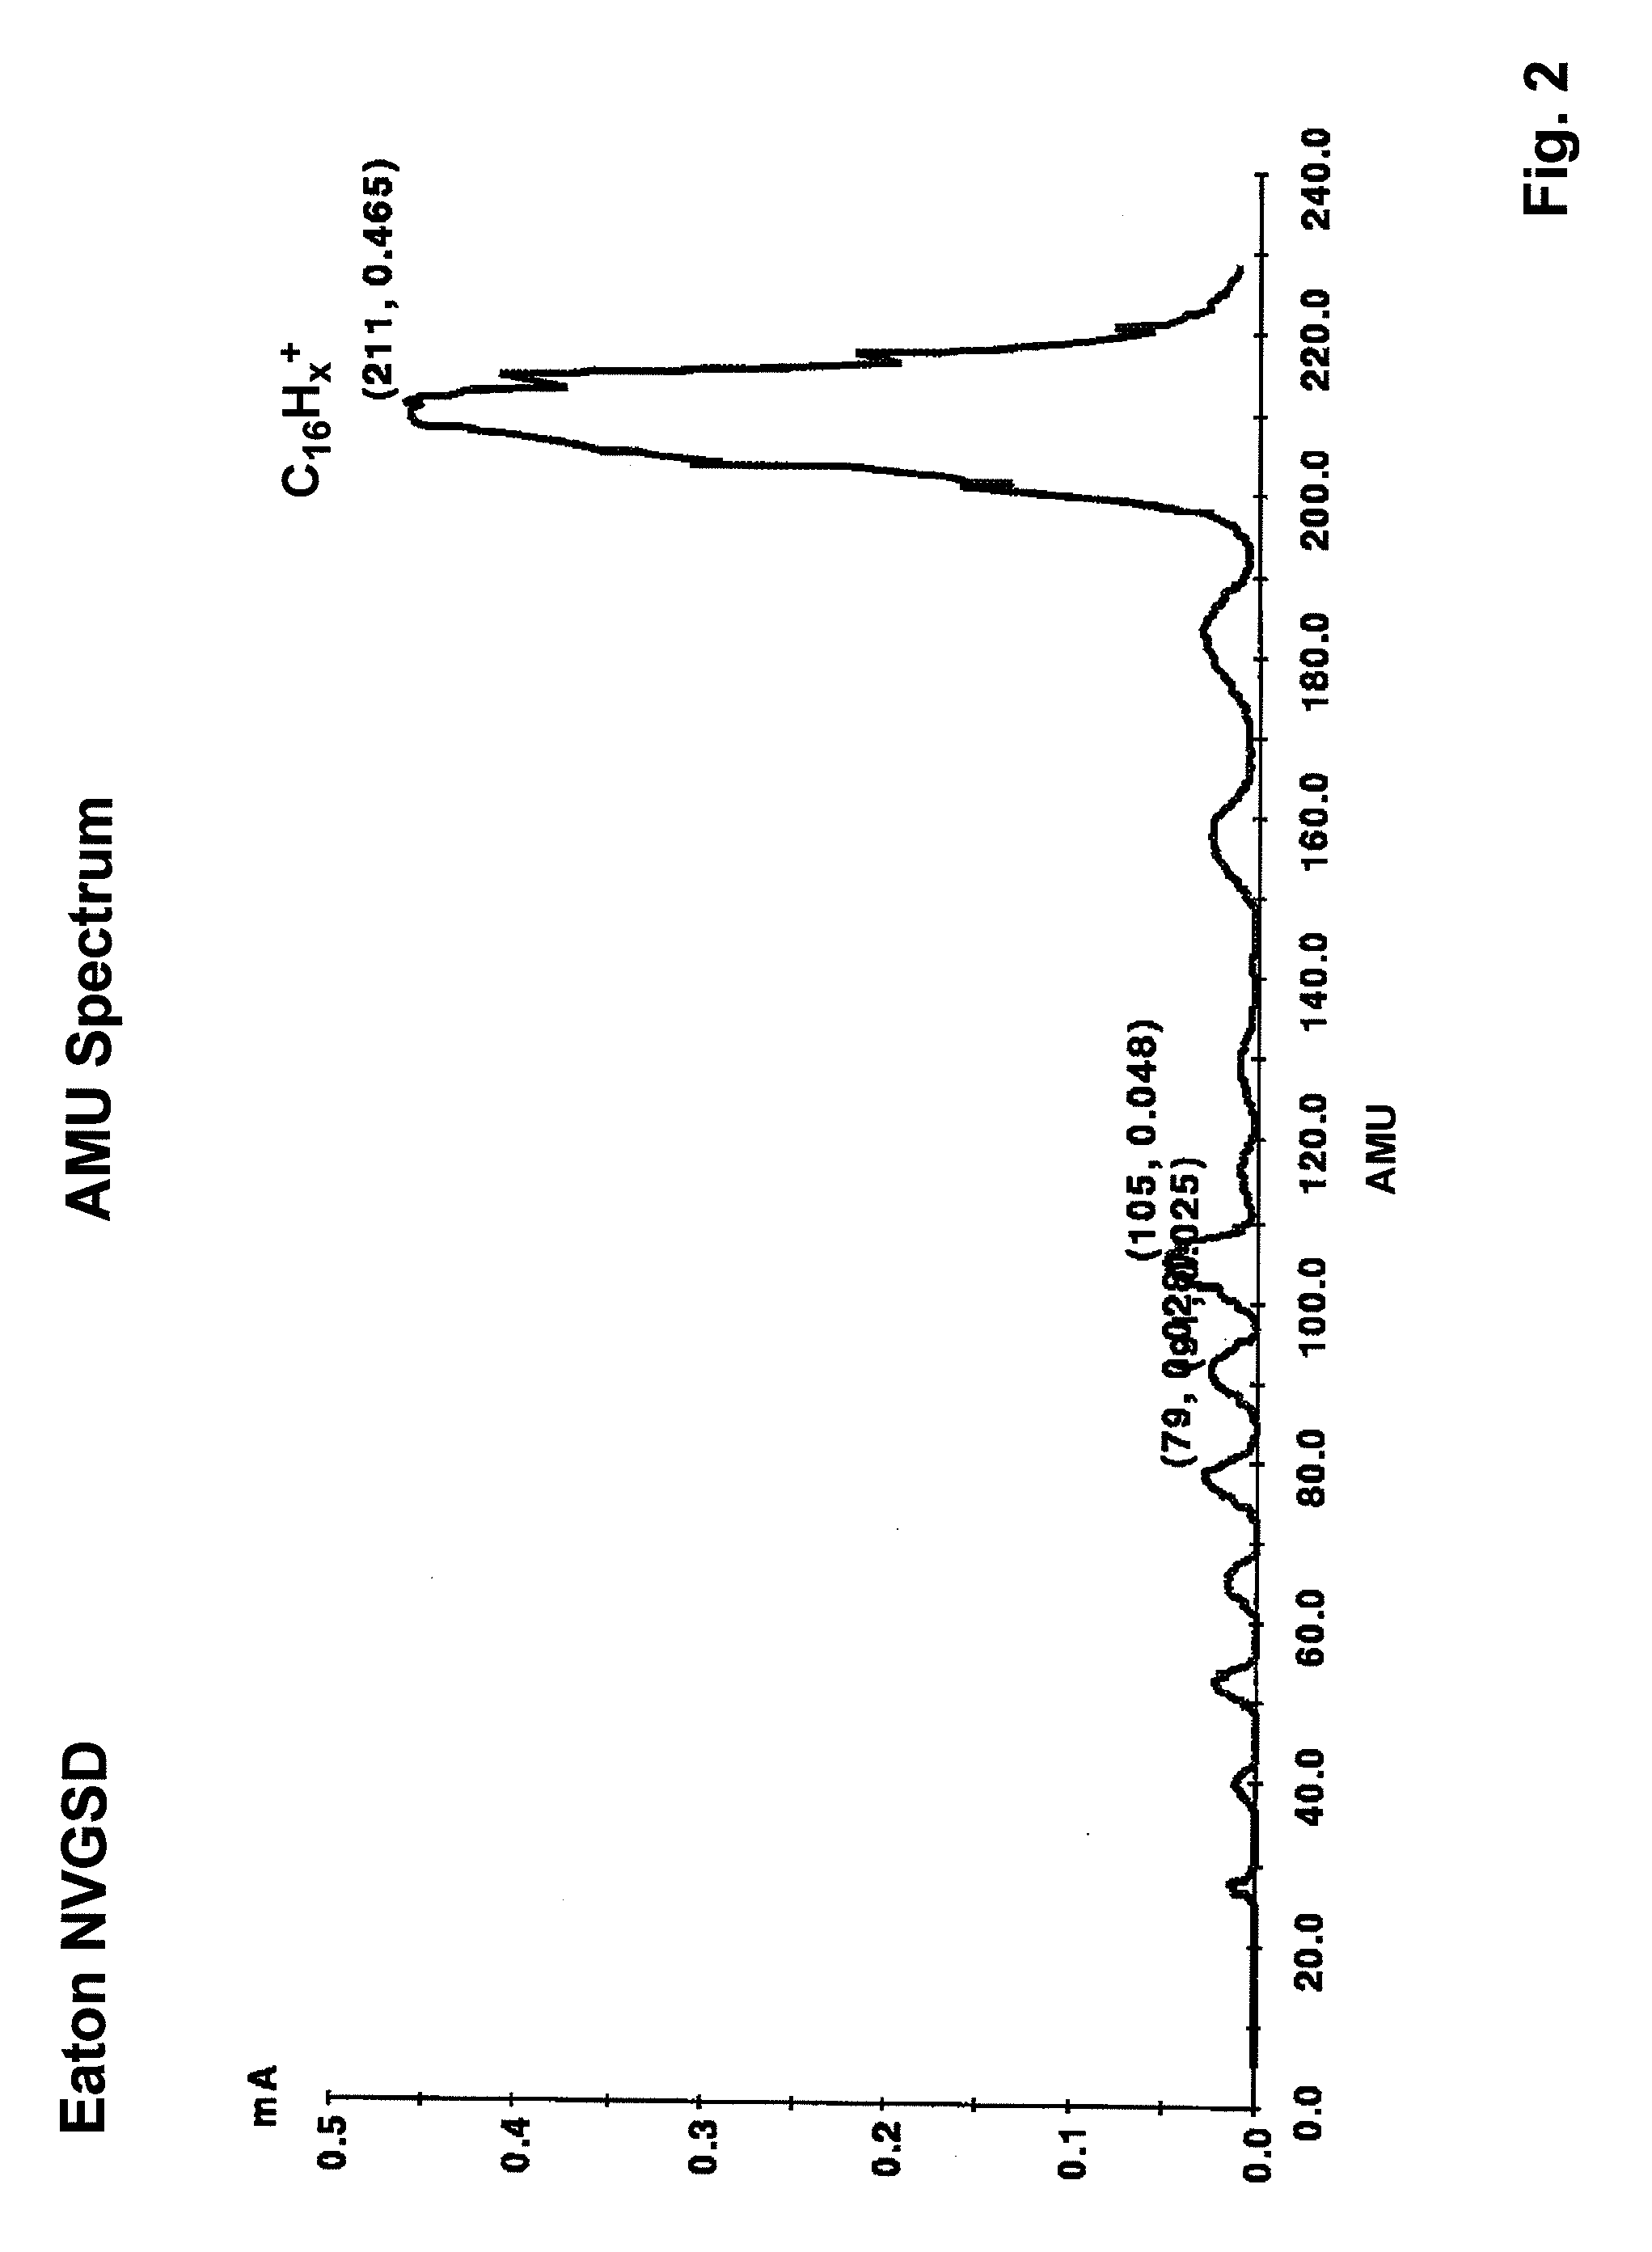 System and method for the manufacture of semiconductor devices by the implantation of carbon clusters